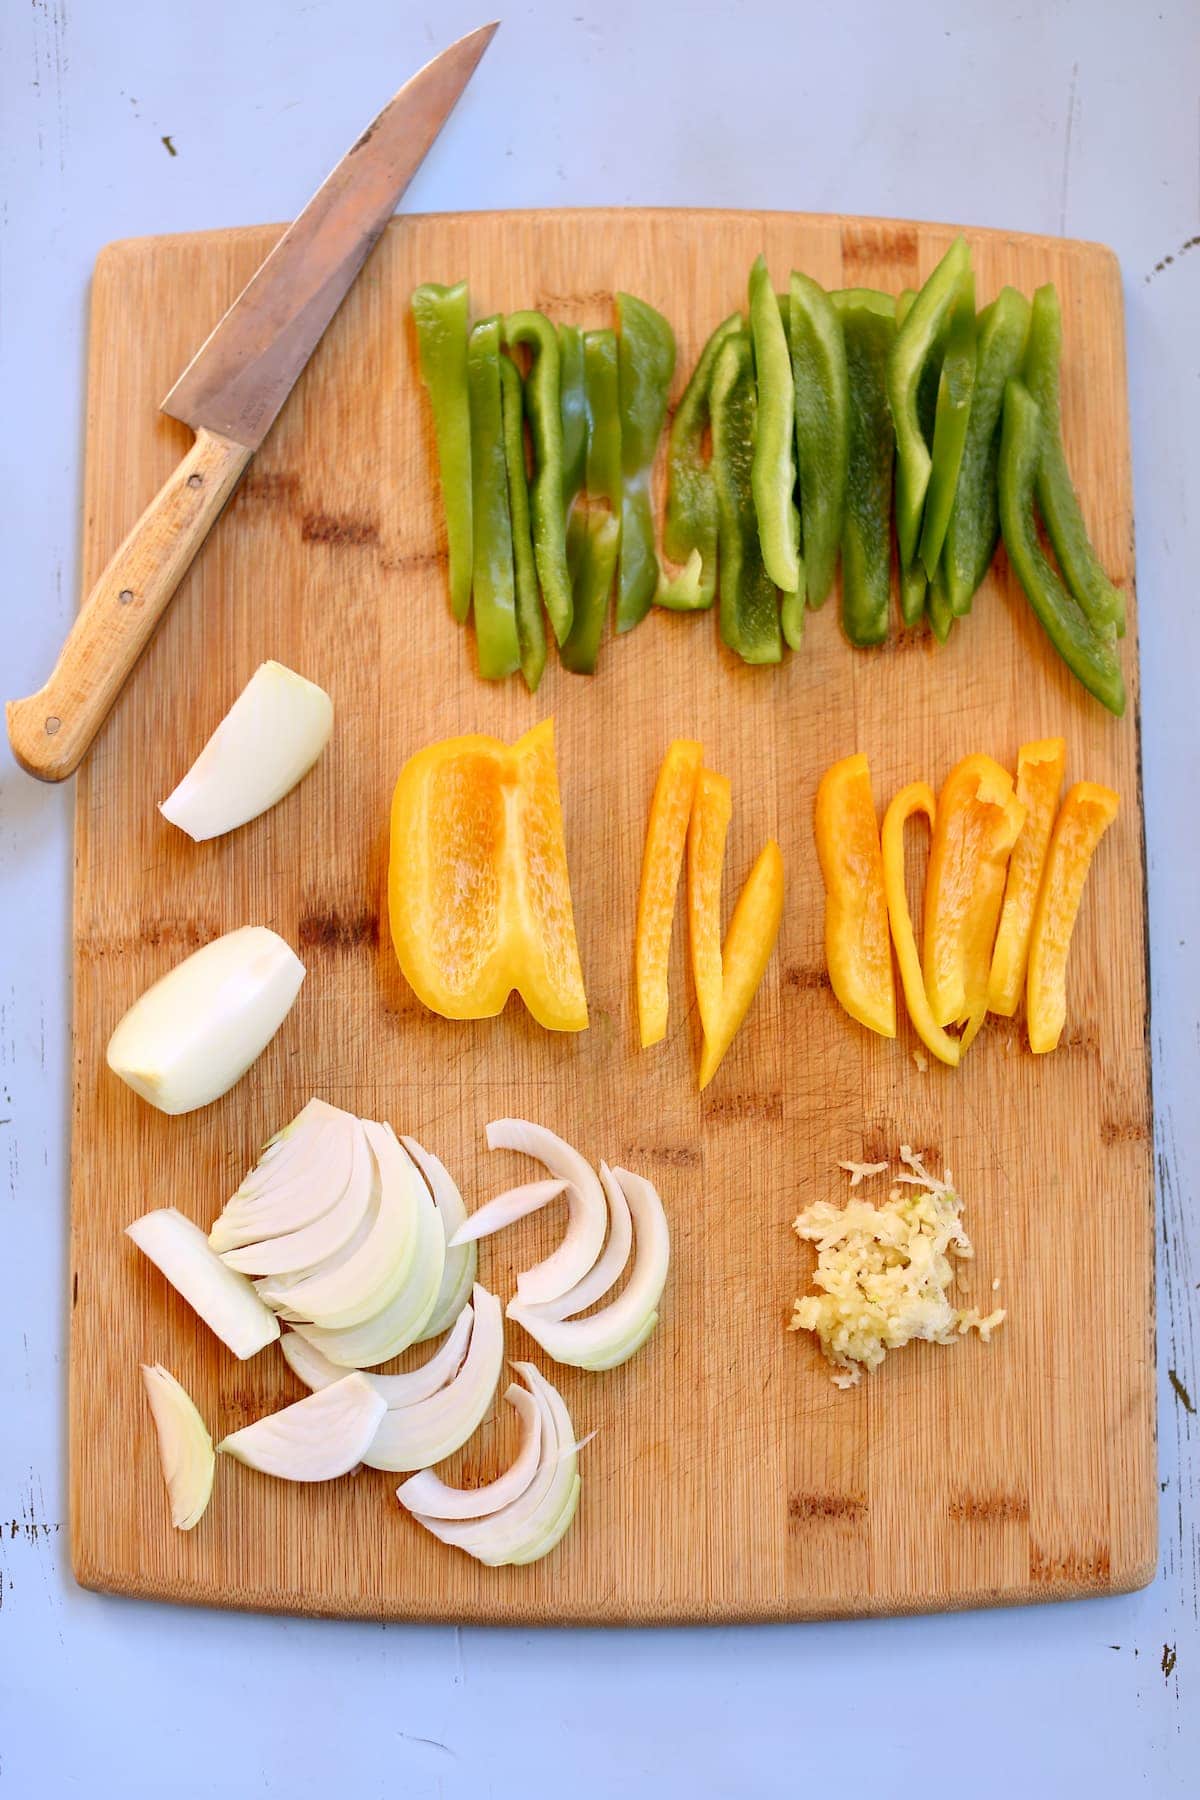 a cutting board with chopped vegetables on it and a knife.